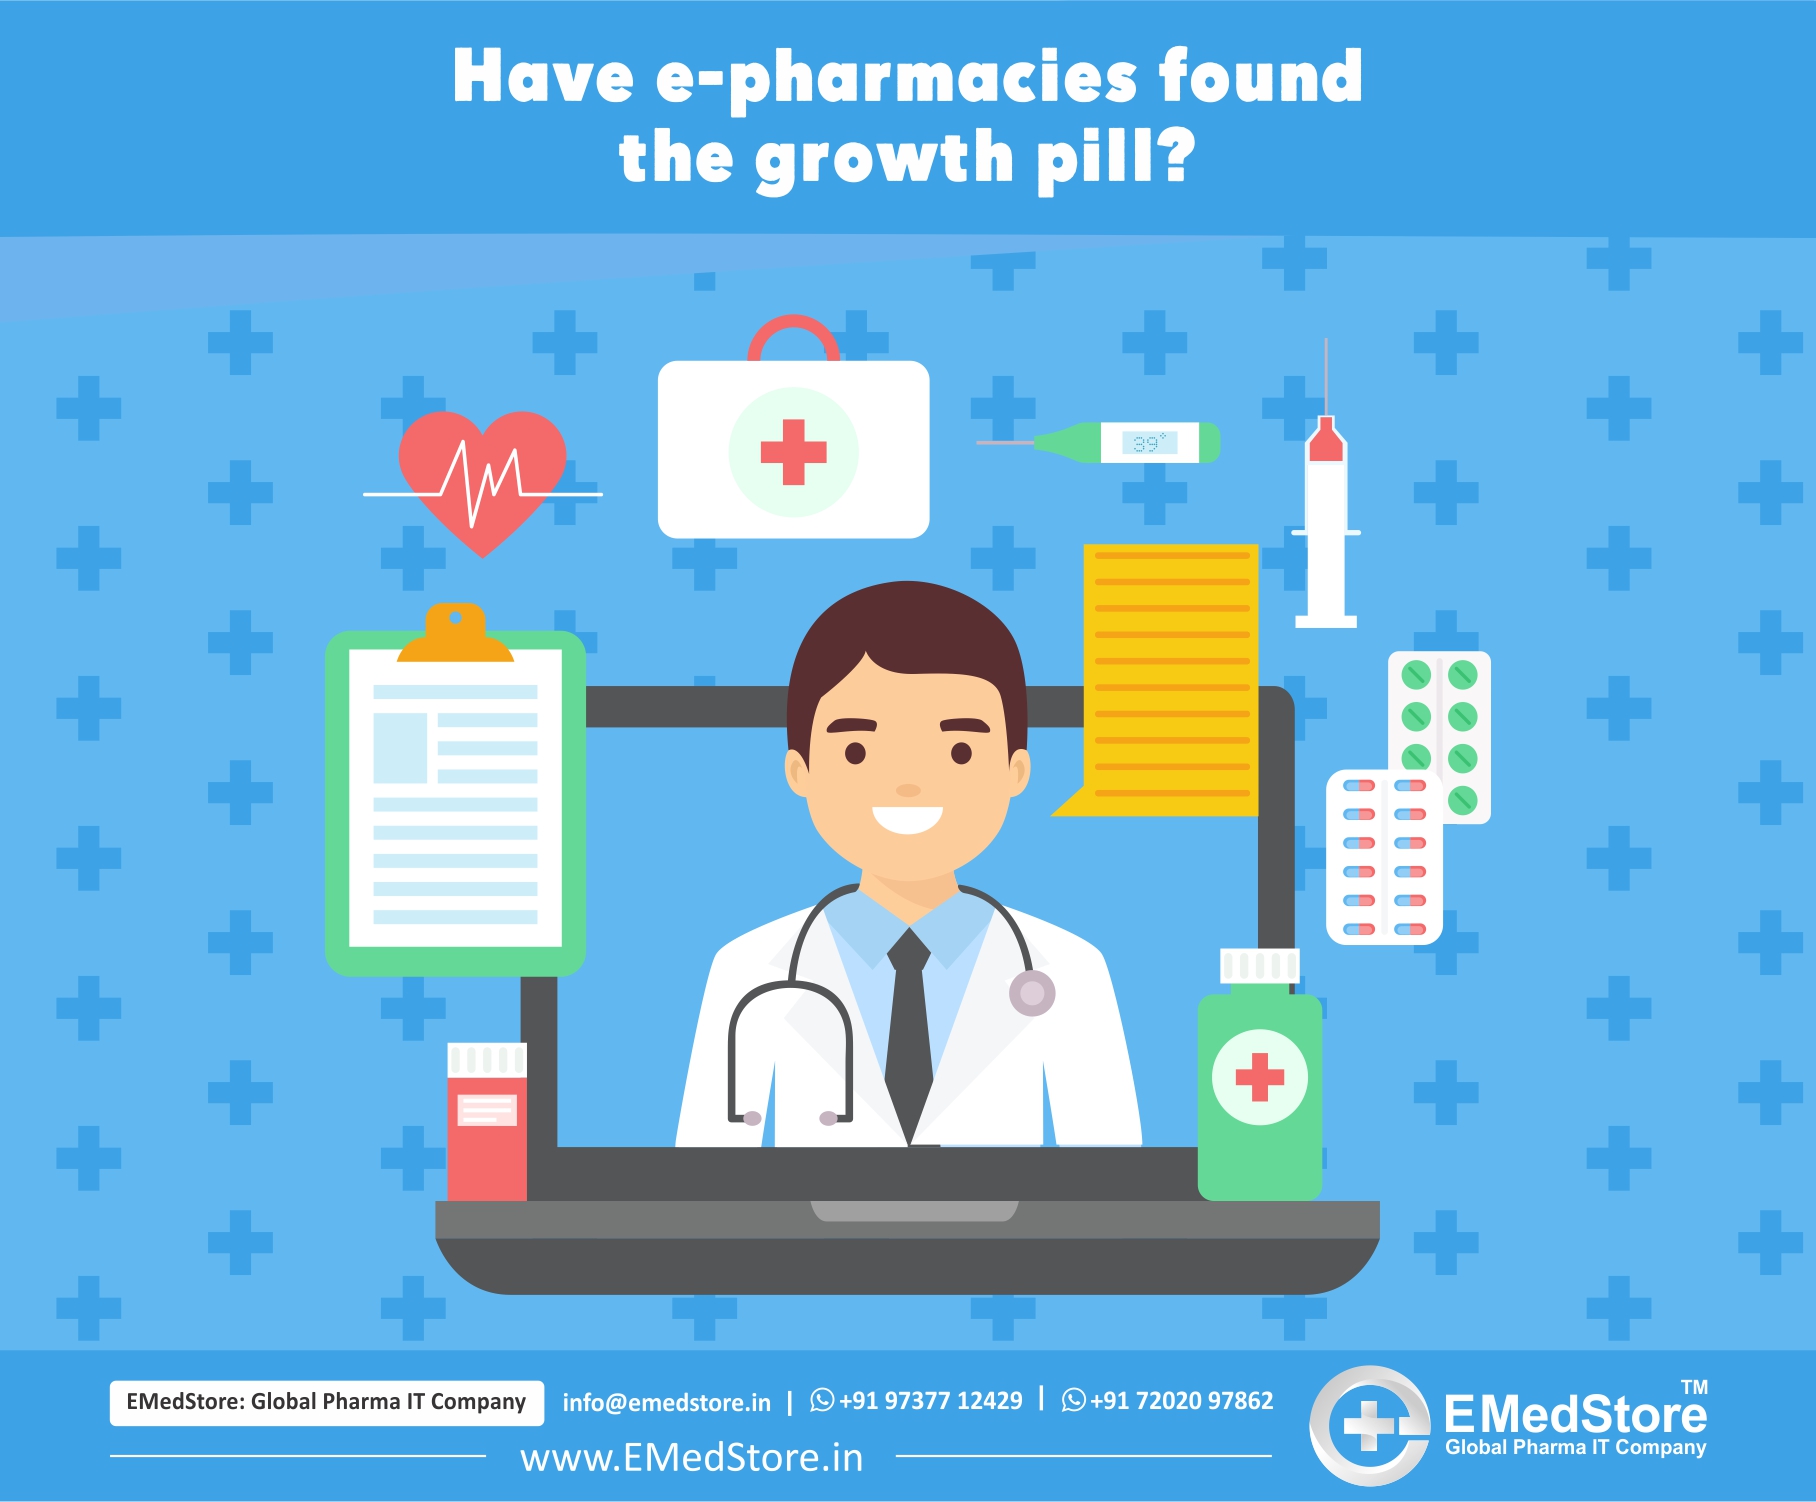 Have e-pharmacies found the growth pill?